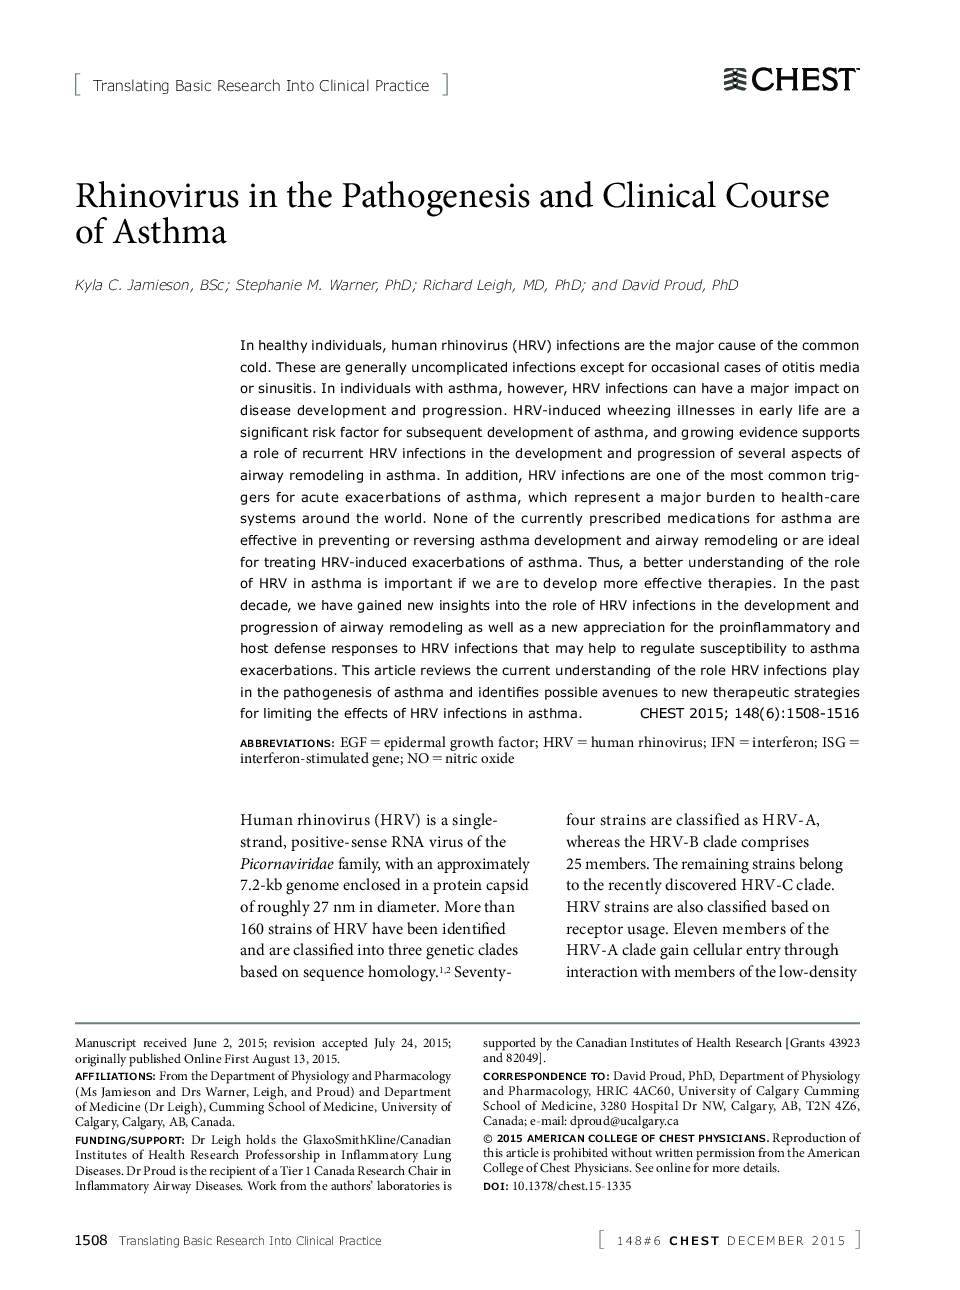 Rhinovirus in the Pathogenesis and Clinical Course of Asthma